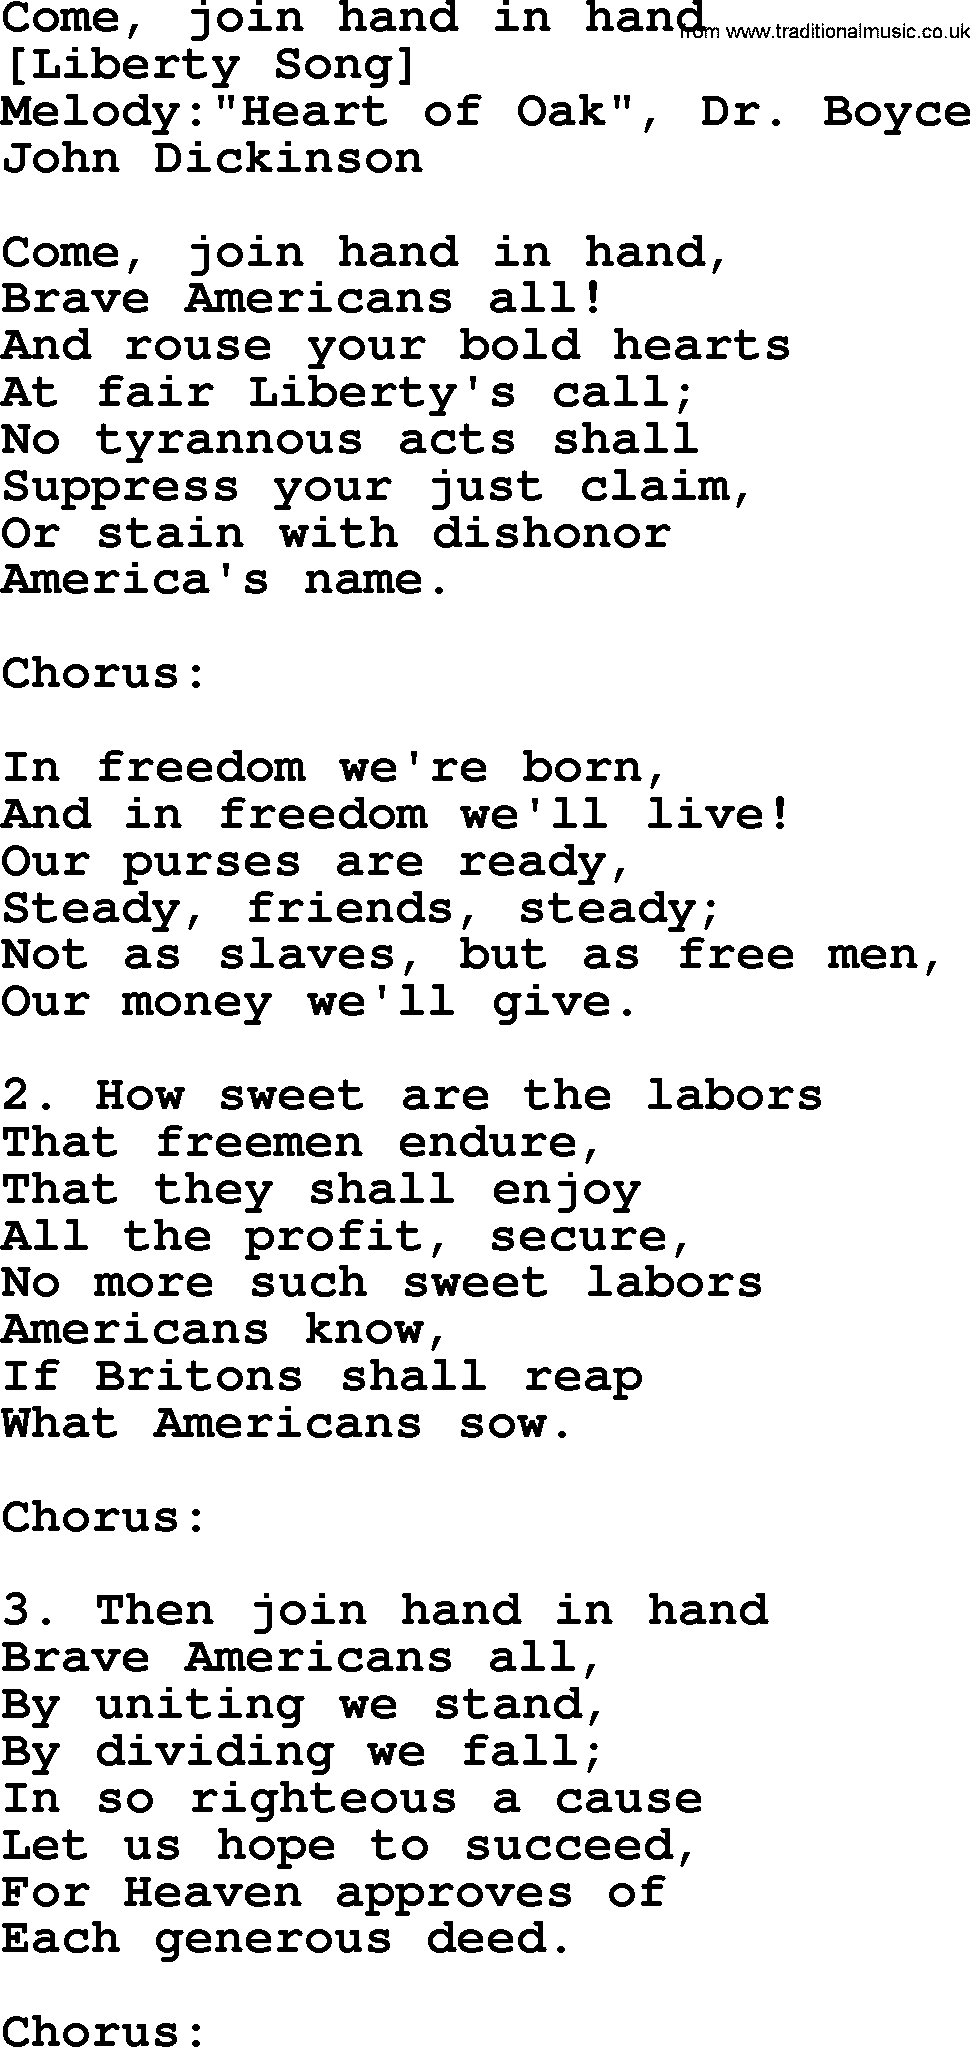 Old American Song: Come, Join Hand In Hand, lyrics